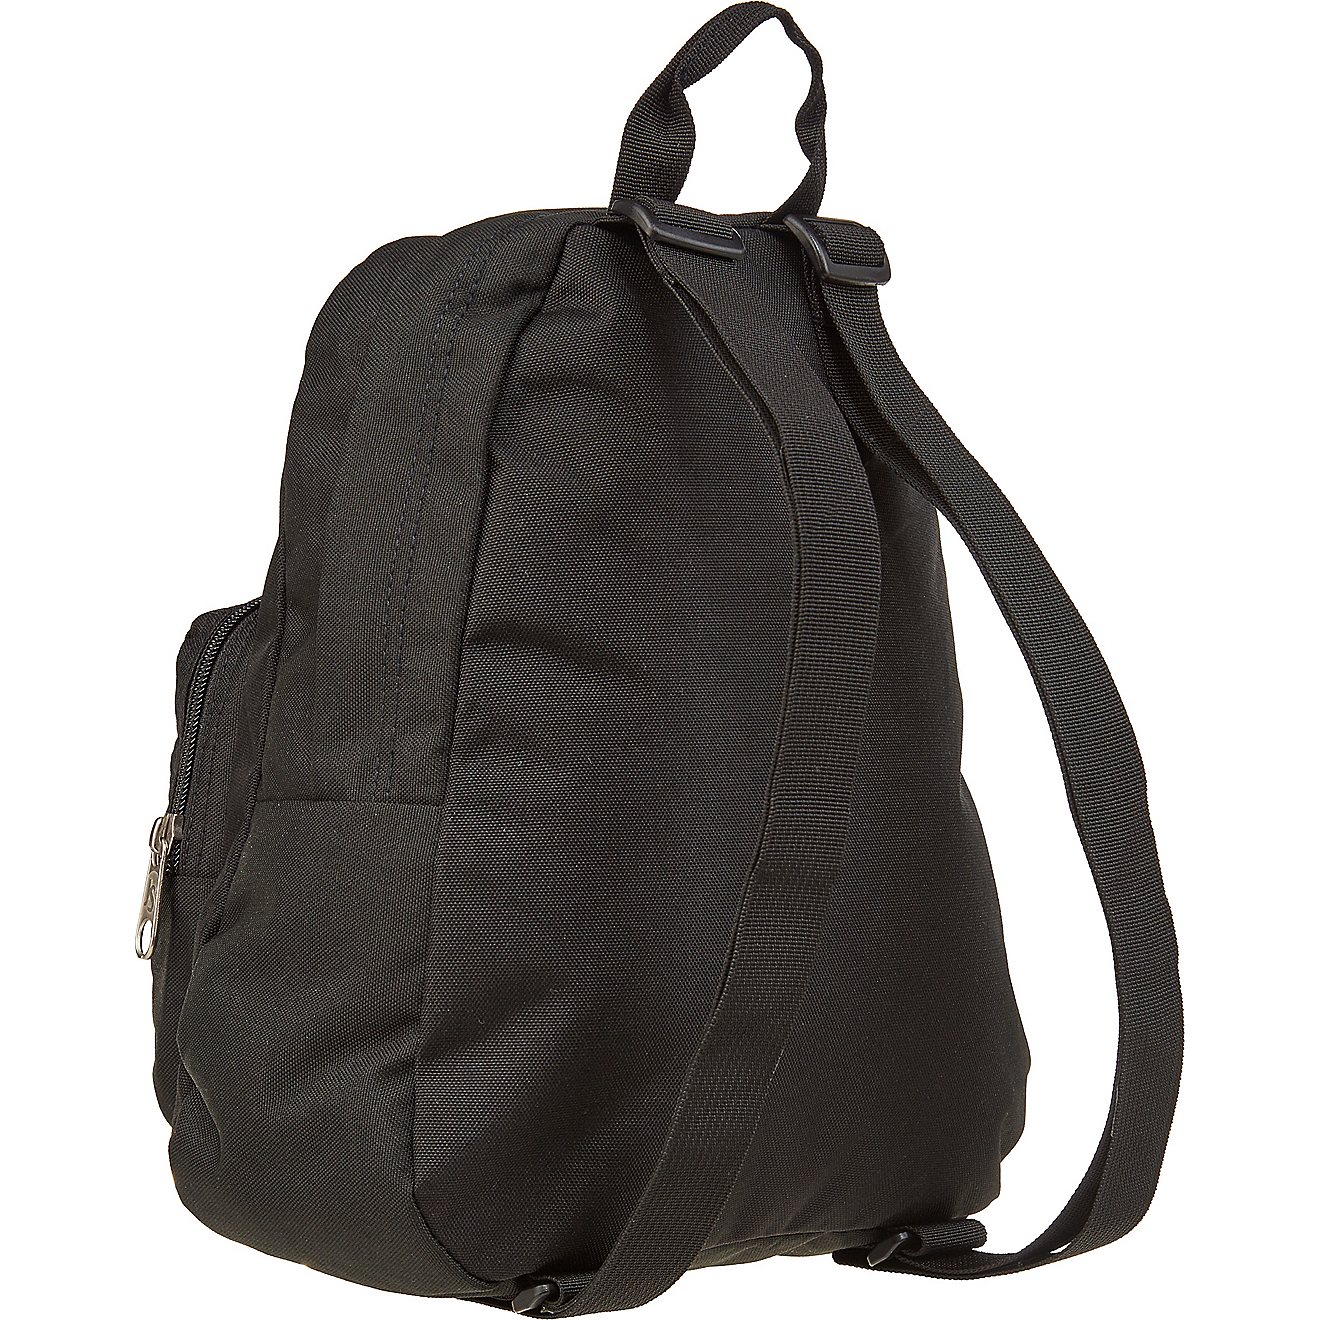 JanSport Half Pint Backpack | Free Shipping at Academy